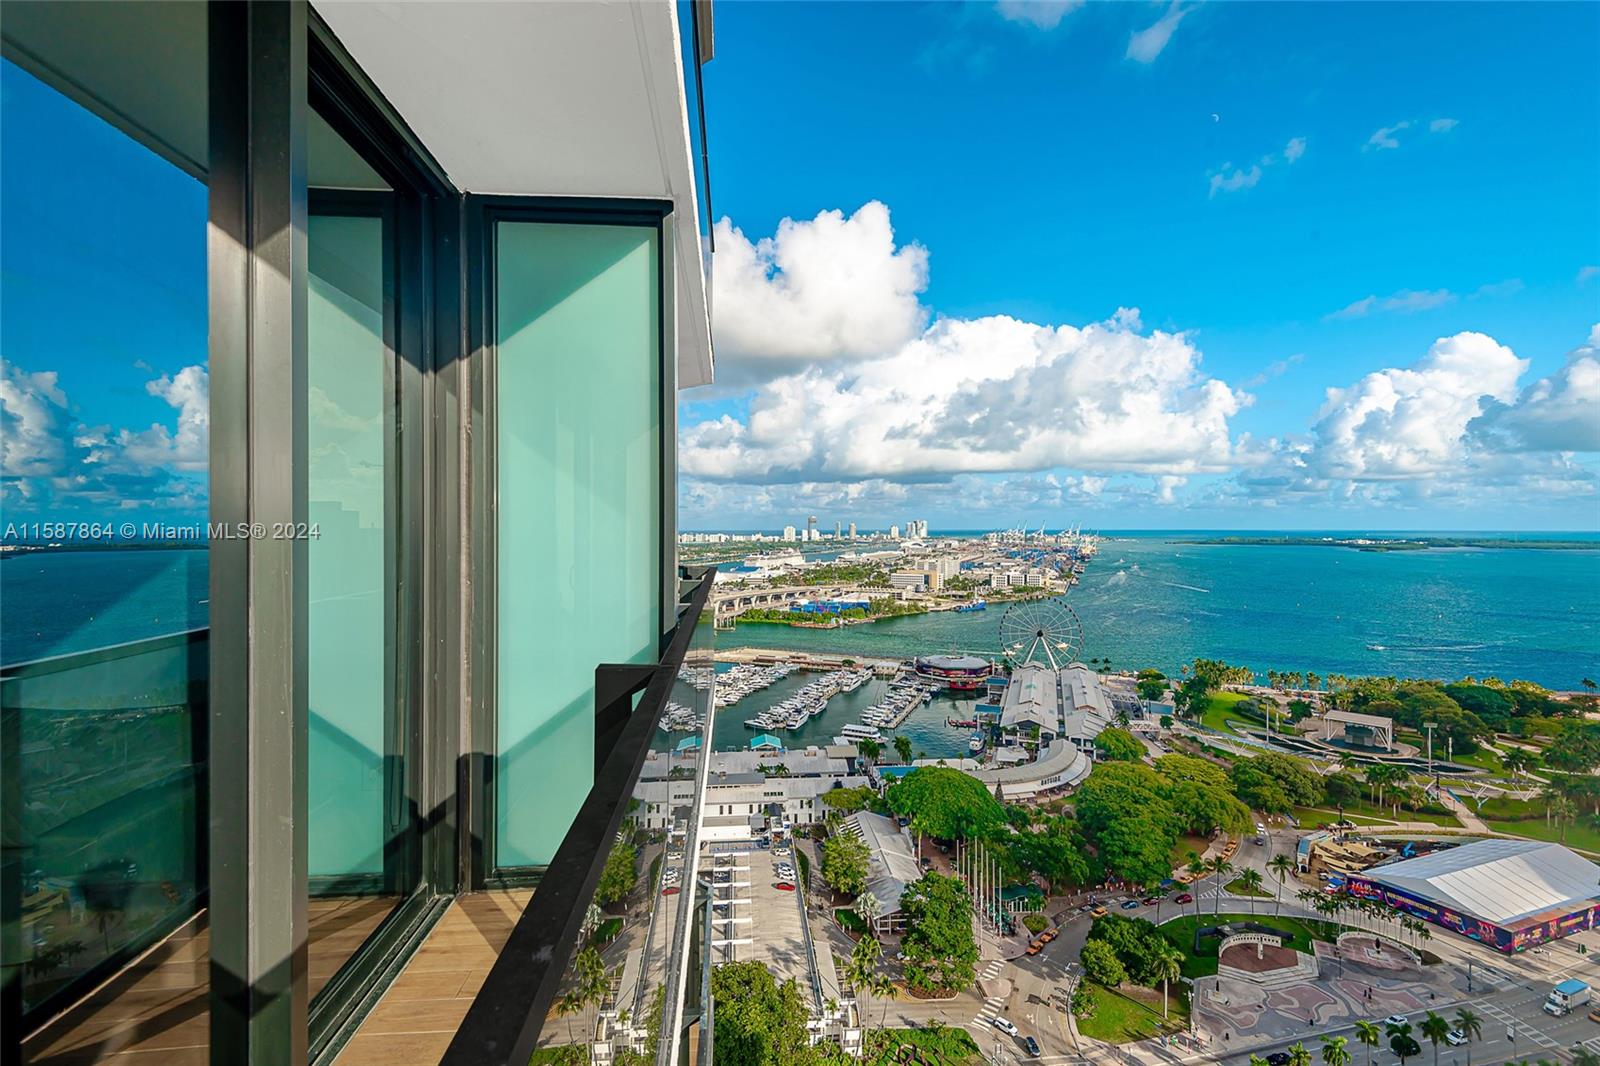 Discover vibrant living in beautifully designed studios with stunning water views. Enjoy mindful and sophisticated interiors complemented by floor-to-ceiling windows showcasing Biscayne Bay and Downtown Miami. Fully furnished units with Ecobee smart thermostats and keyless entry offer modern convenience. With access to curated amenities and proximity to entertainment, arts, and dining, experience a dynamic lifestyle at The Elser Hotel Residences.